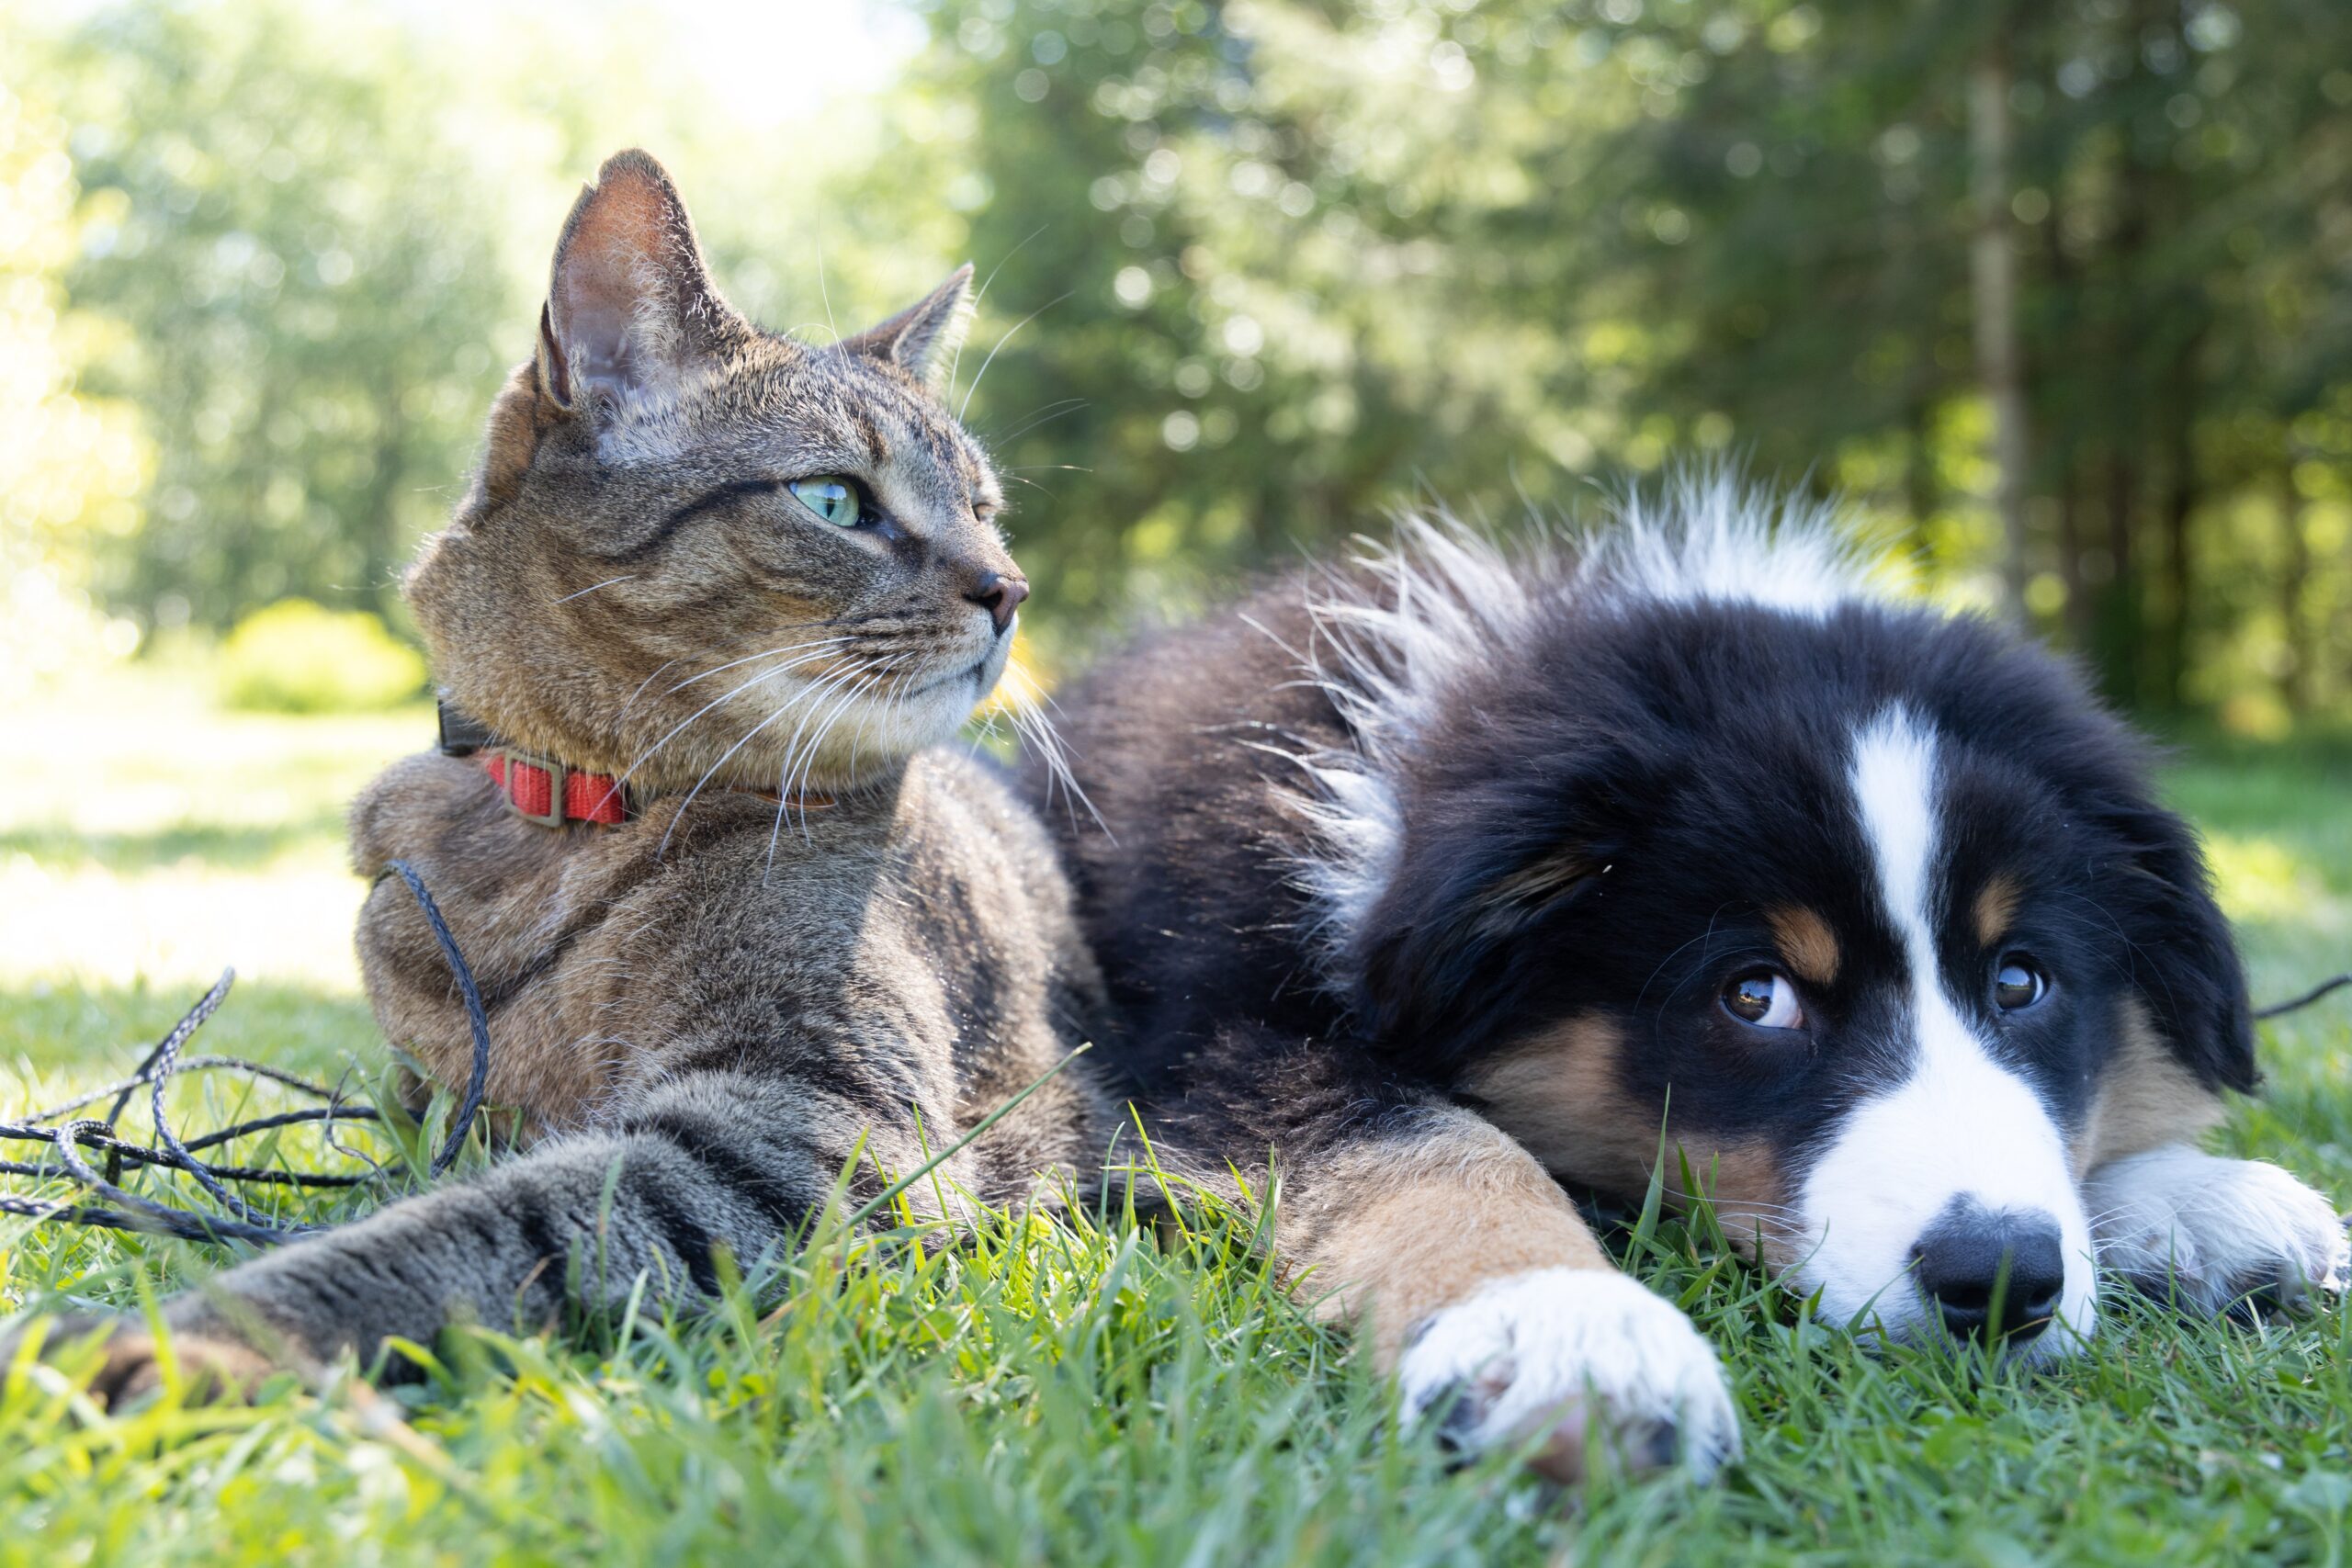 Keep Your Pet’s Digestive System Healthy With Intesto-Guard